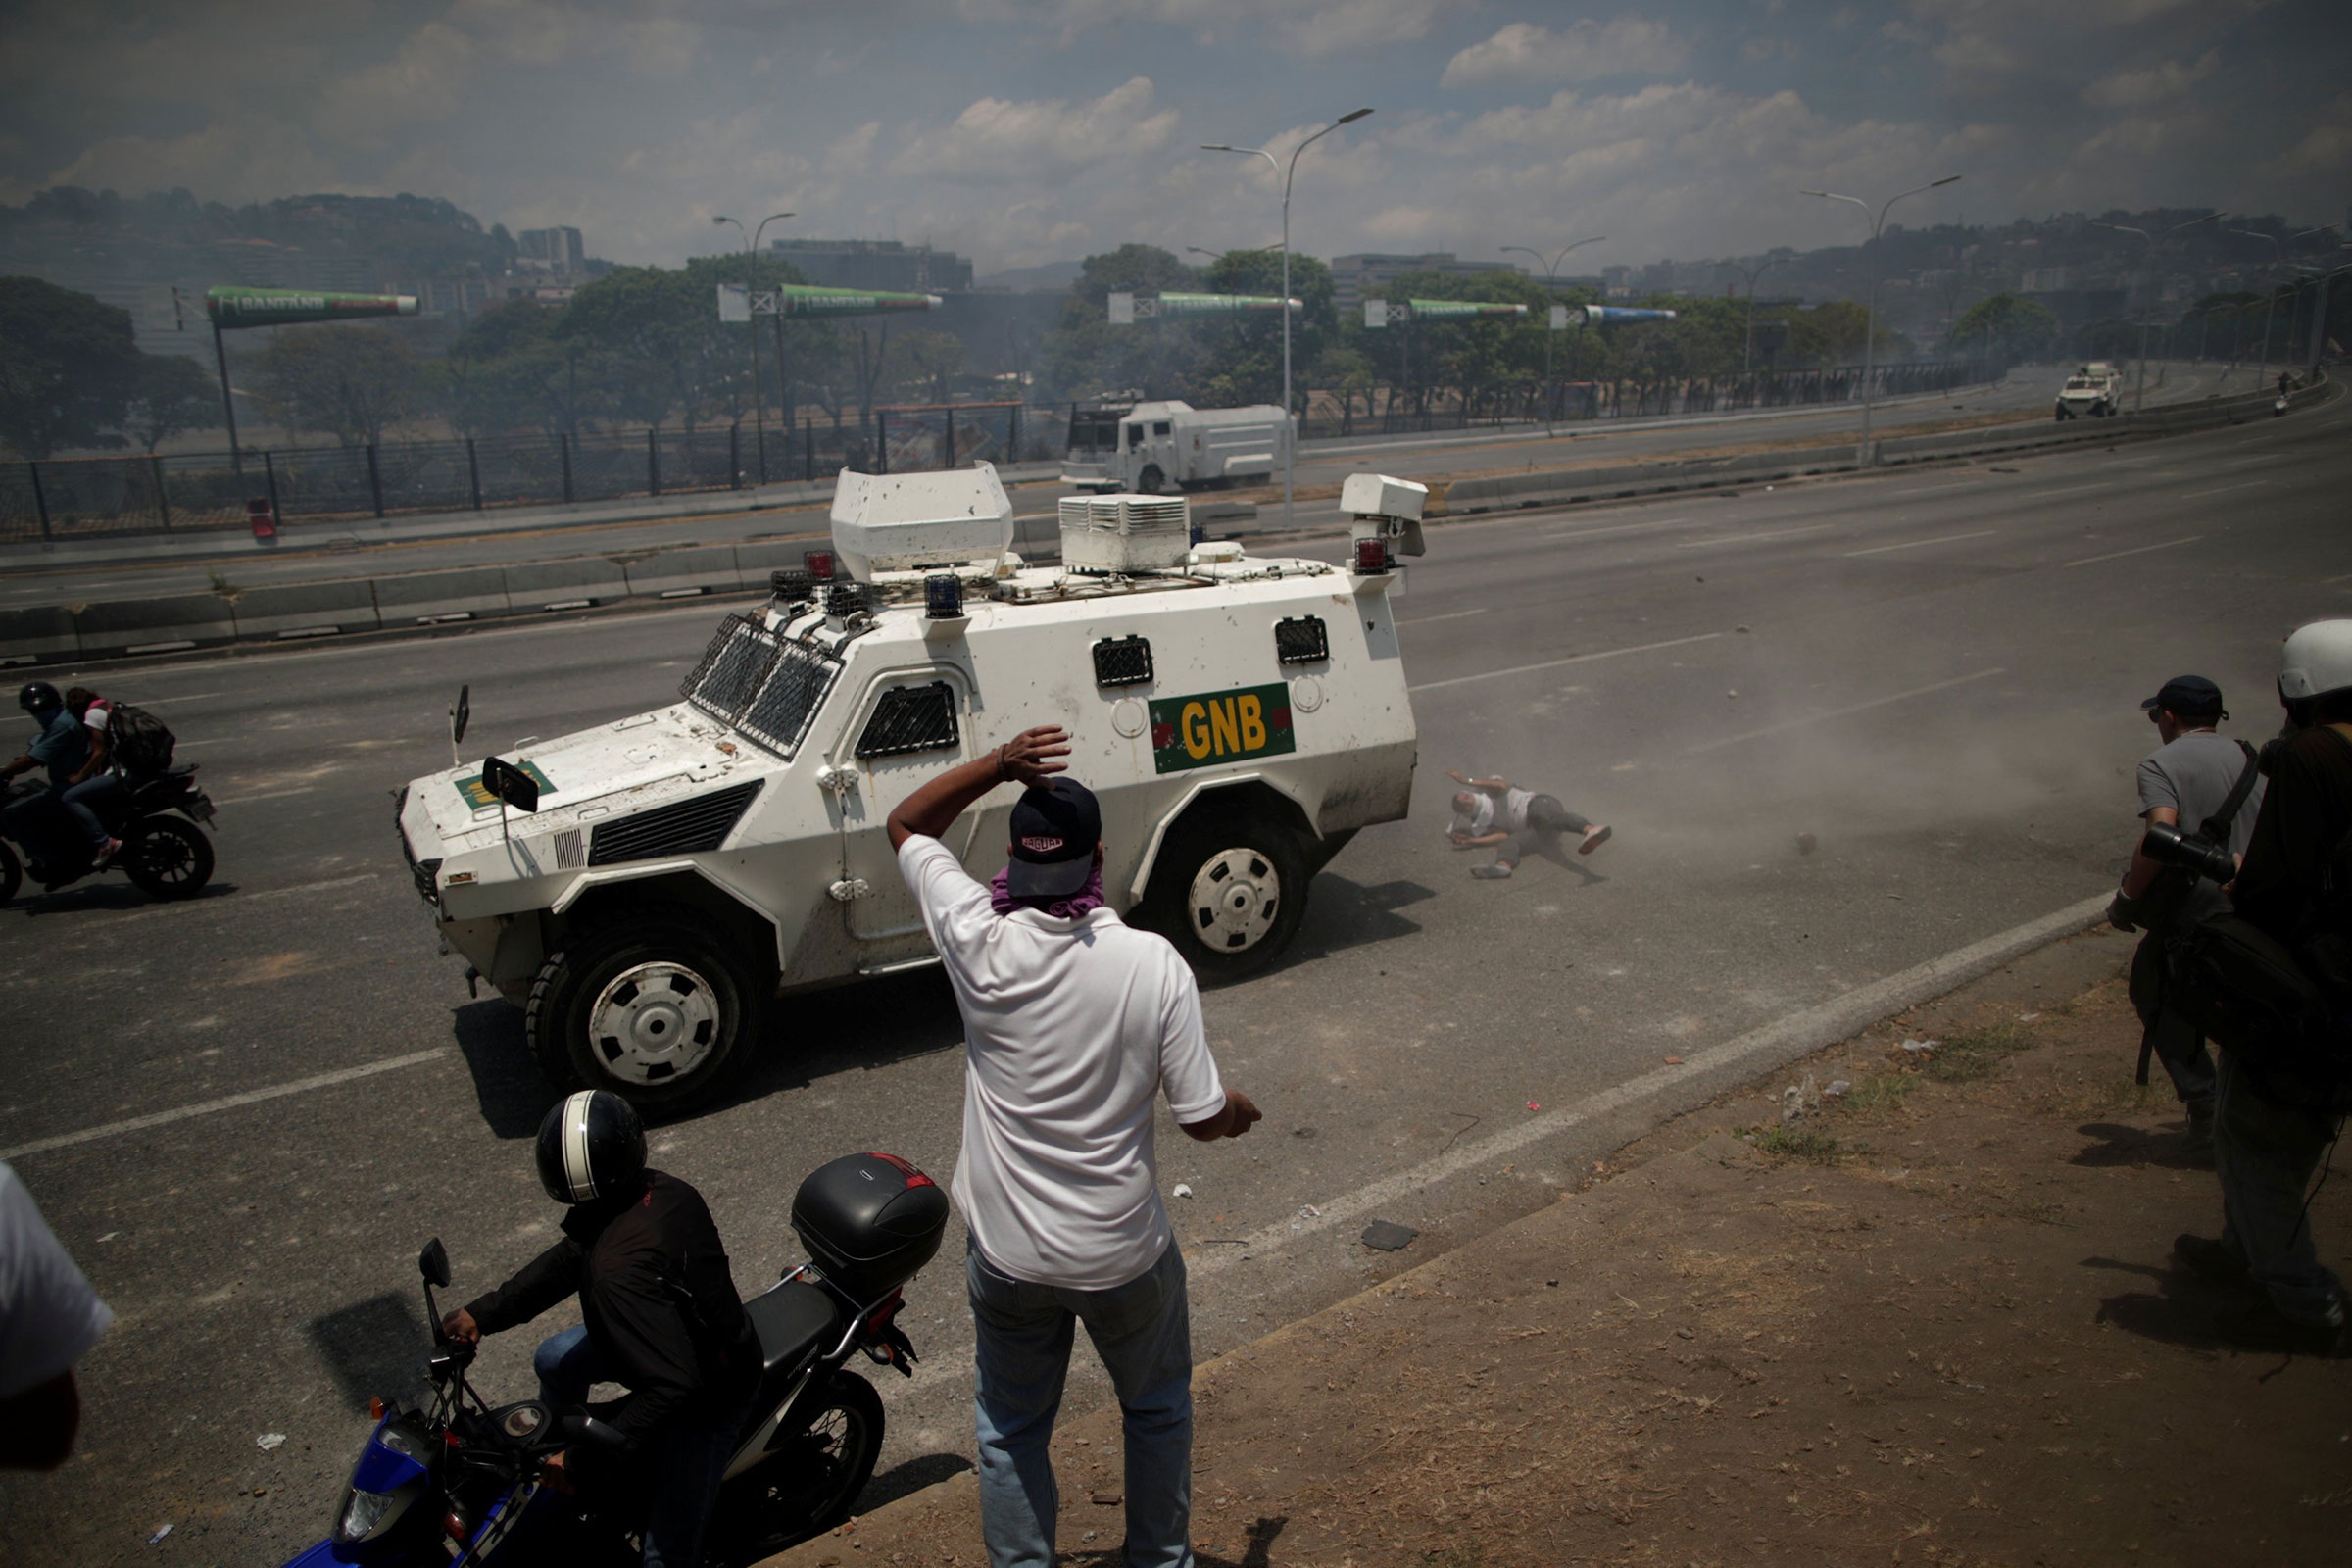 Amid the turmoil on April 30, a protester is hit by a Venezuelan National Guard vehicle in Caracas (Ueslei Marcelino—Reuters)